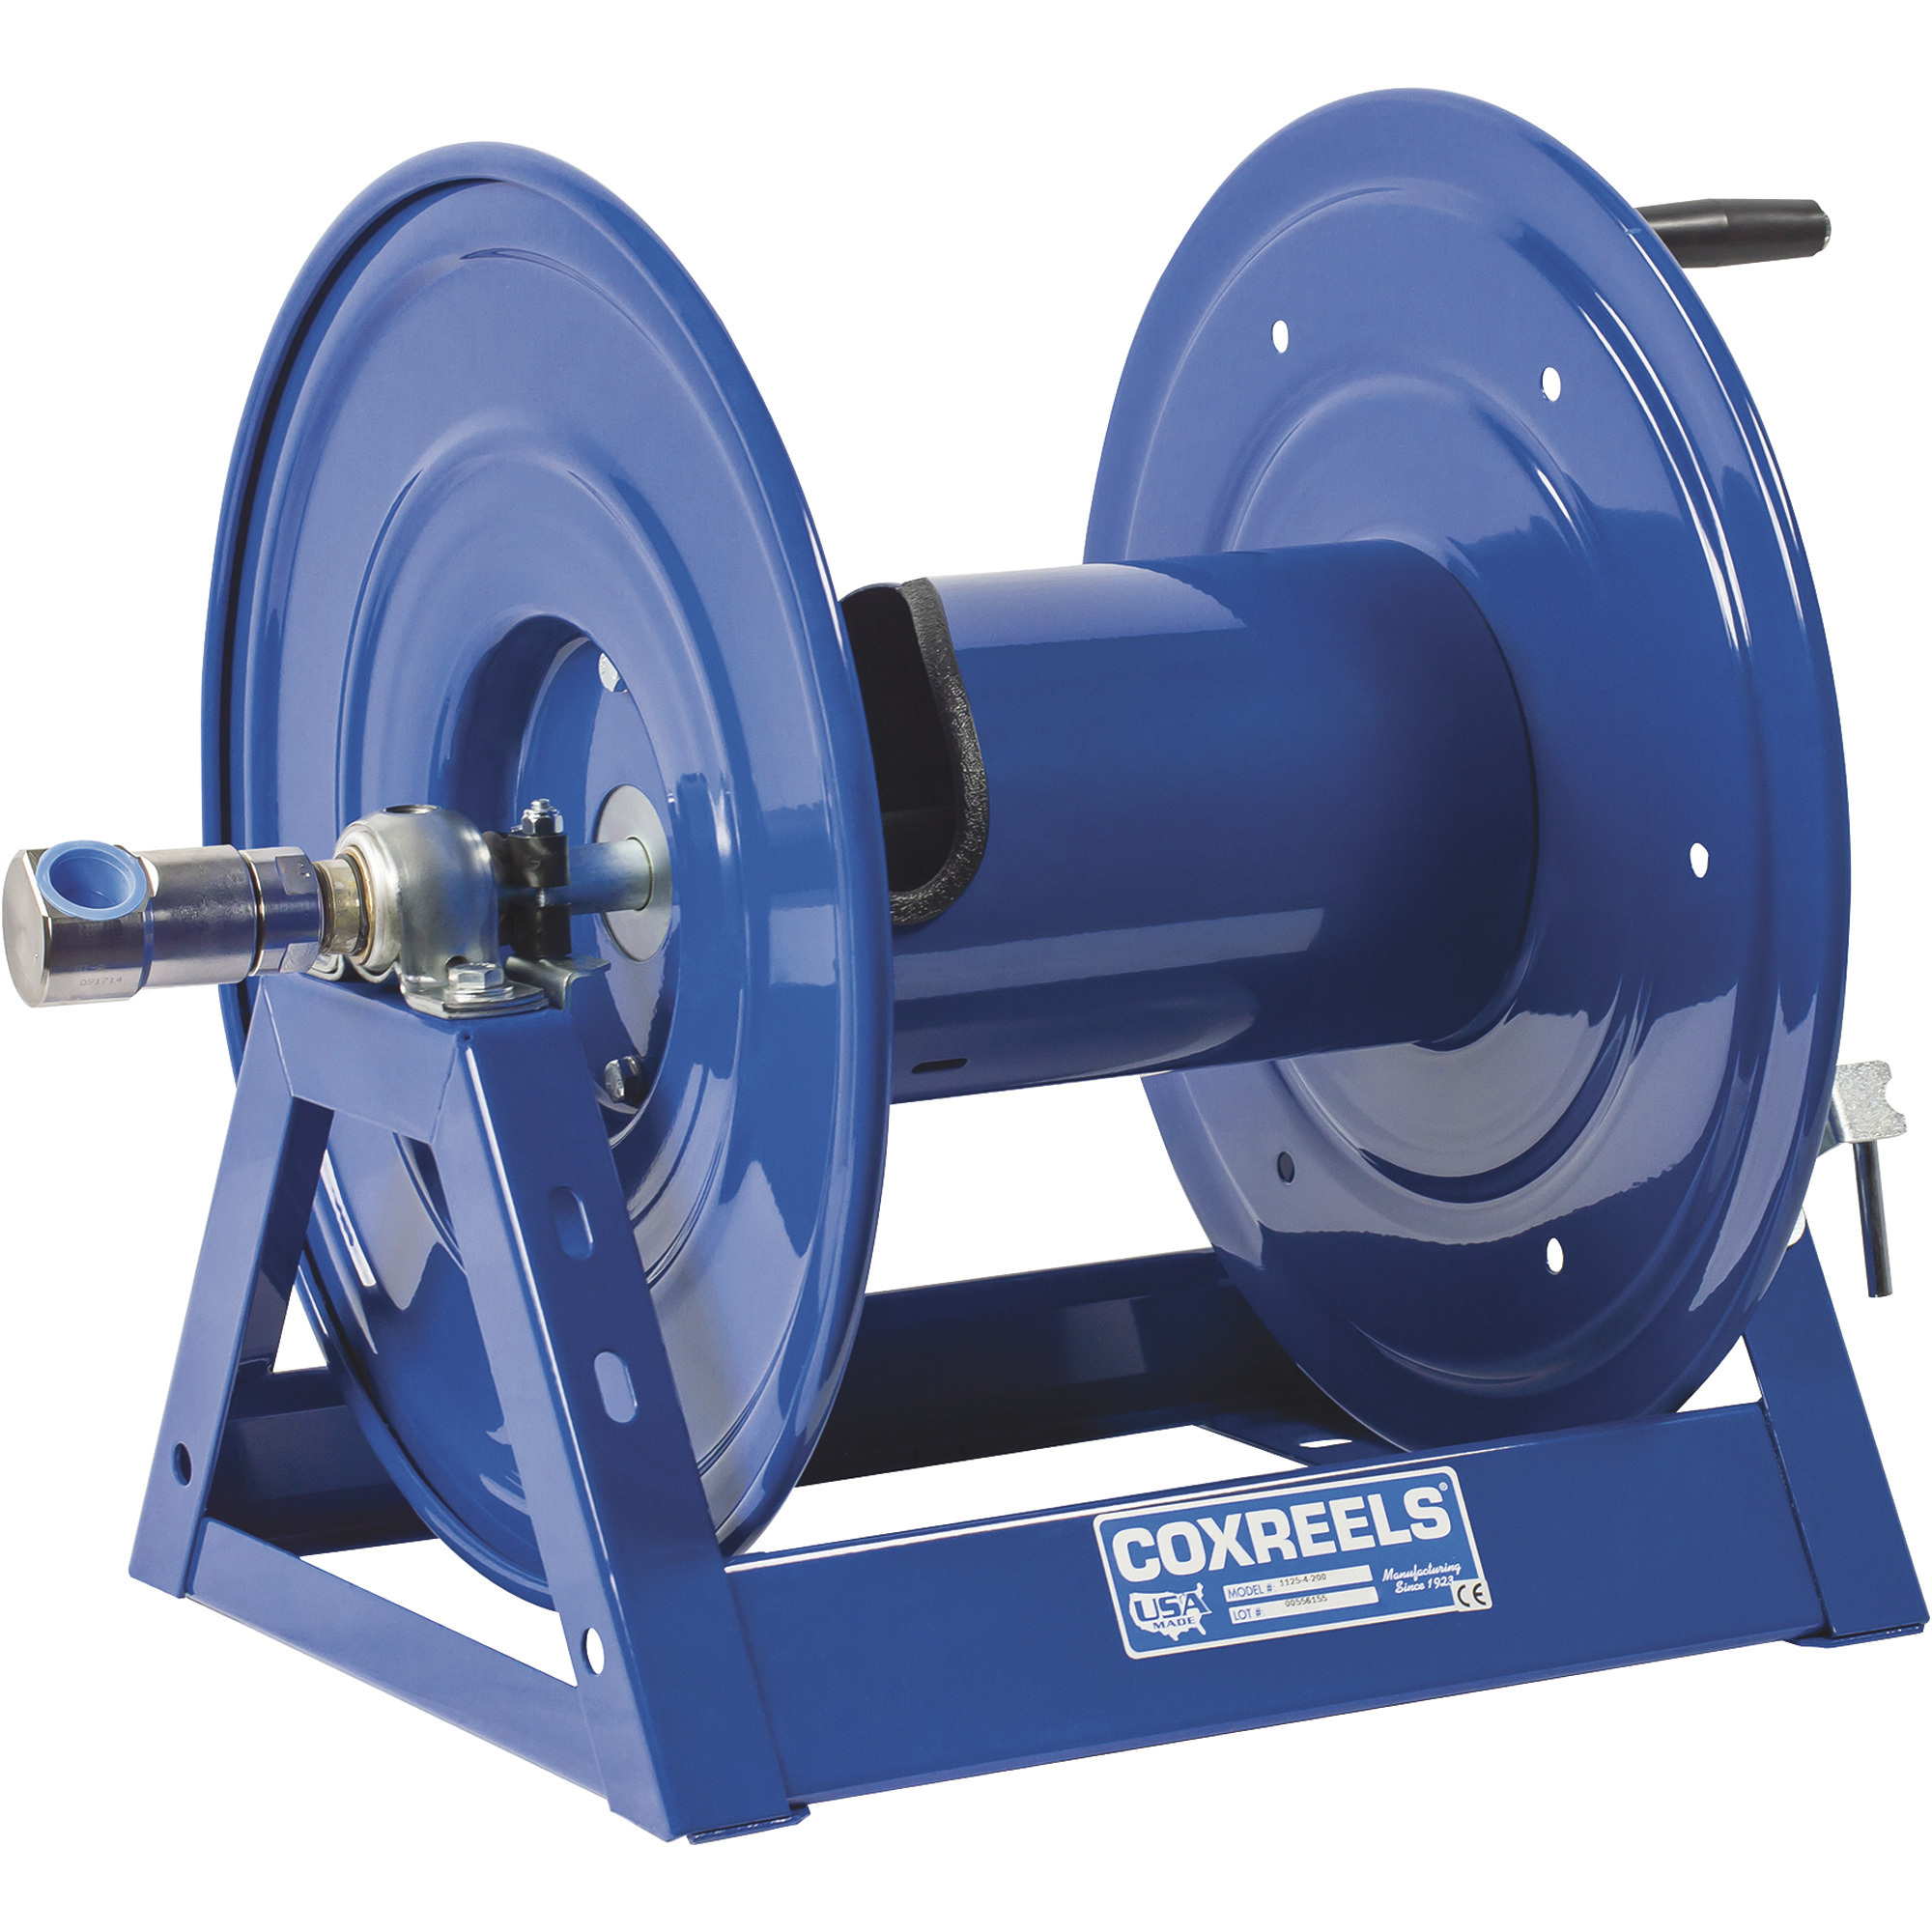 Coxreels 1125 Series Hand-Crank Hose Reel, Holds 1Inch x 100ft. Hose, Max. 3000 PSI, Model 1125-6-100